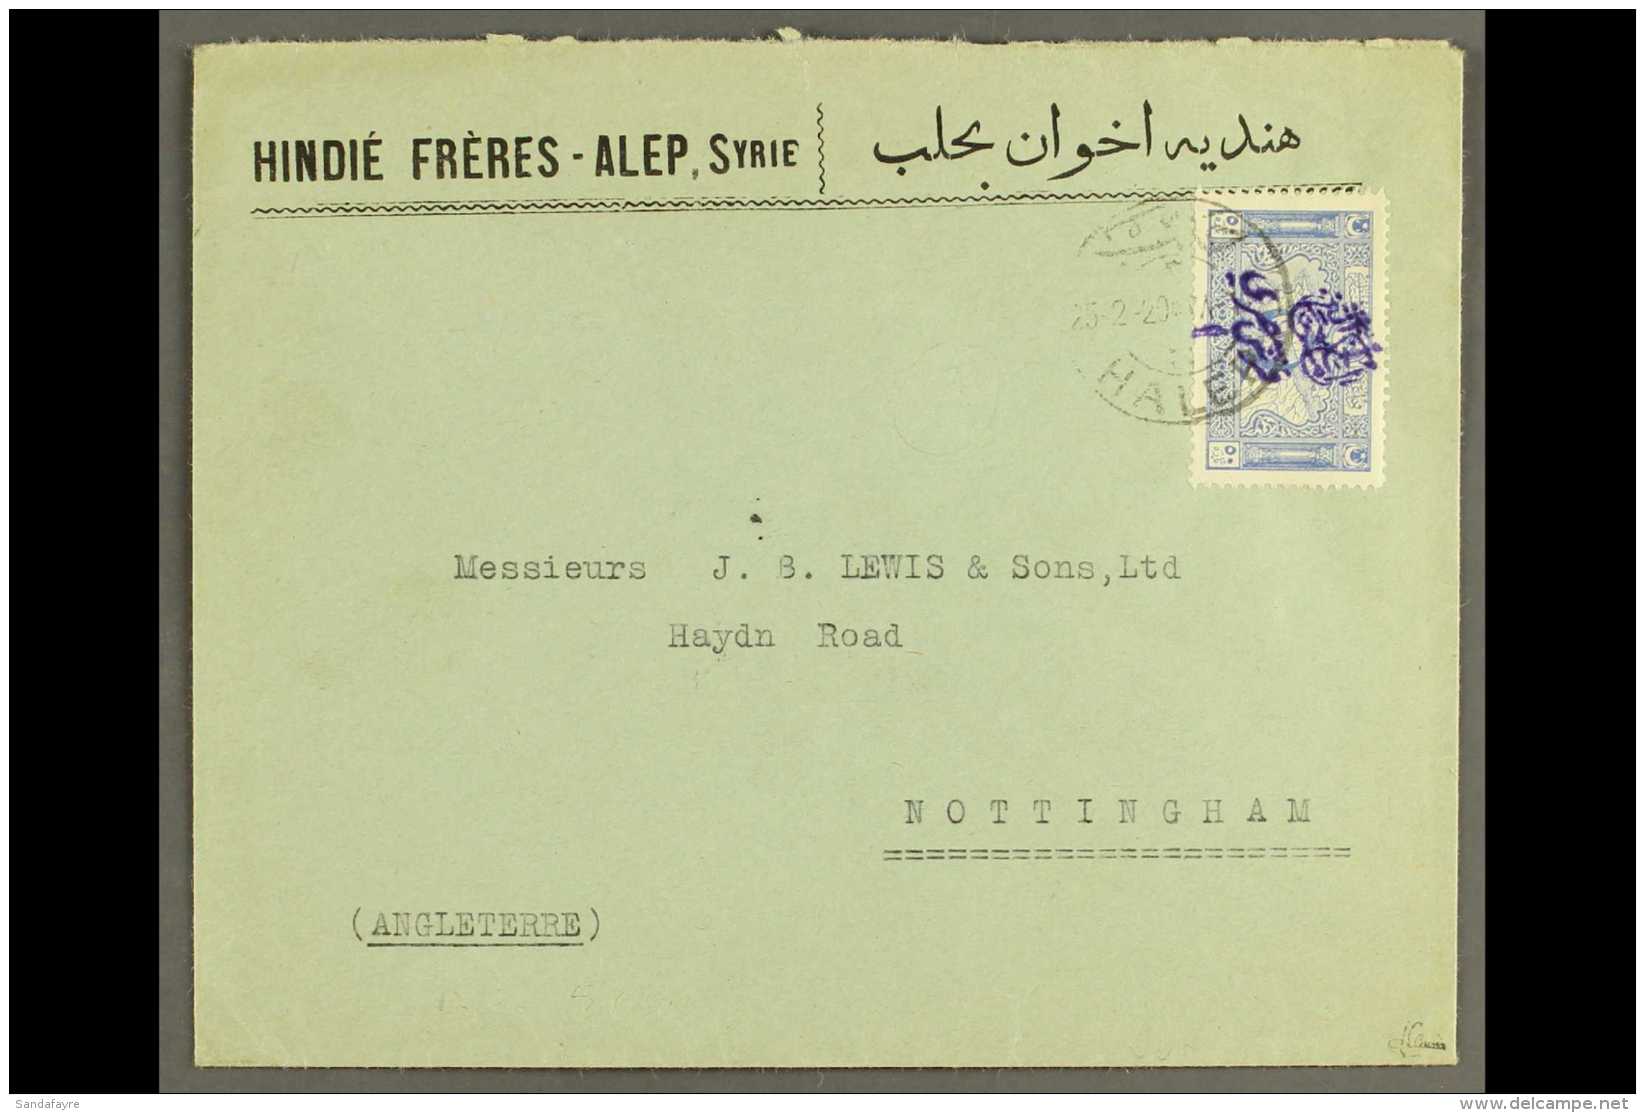 ARAB KINGDOM 1920 Attractive Commercial Cover To England Bearing 1920 1pi On 50pa Arab Kingdom Handstamp (SG K78)... - Syrie